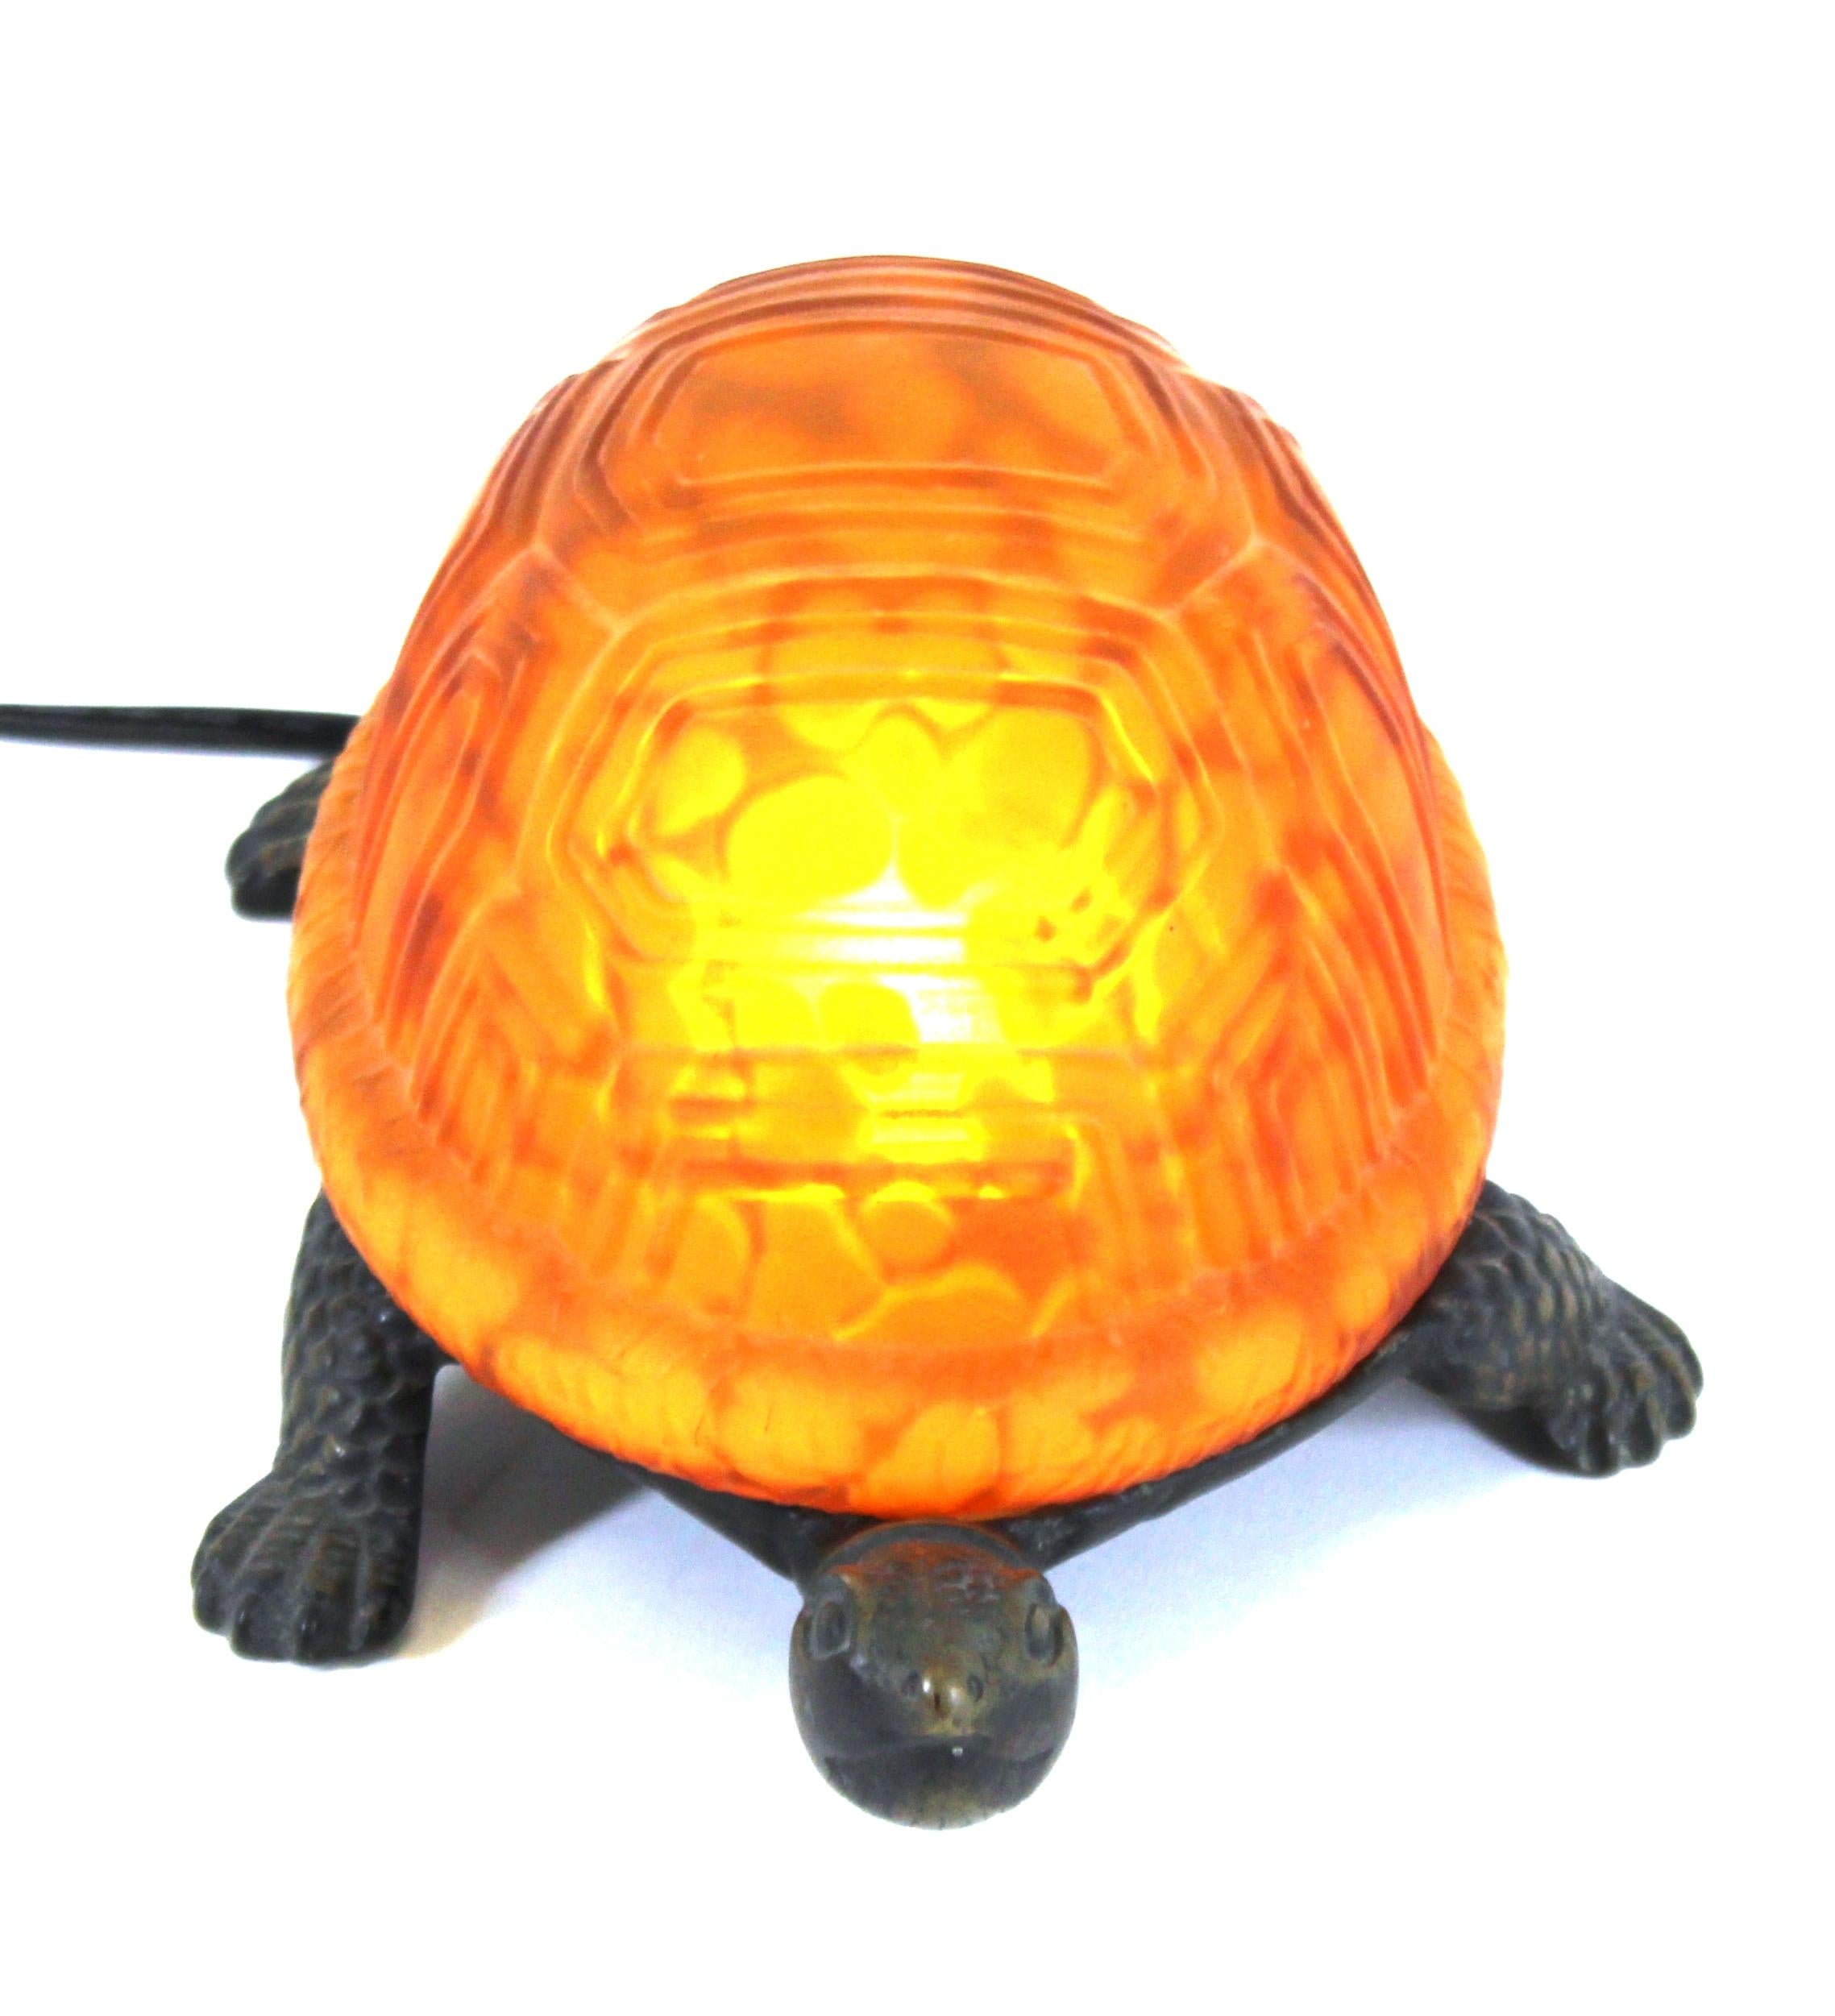 American diminutive bronze and art glass turtle table lamp or desk lamp. Made in circa 1930. The piece is marked 'TC' on the bottom. In great vintage condition with age-appropriate wear.